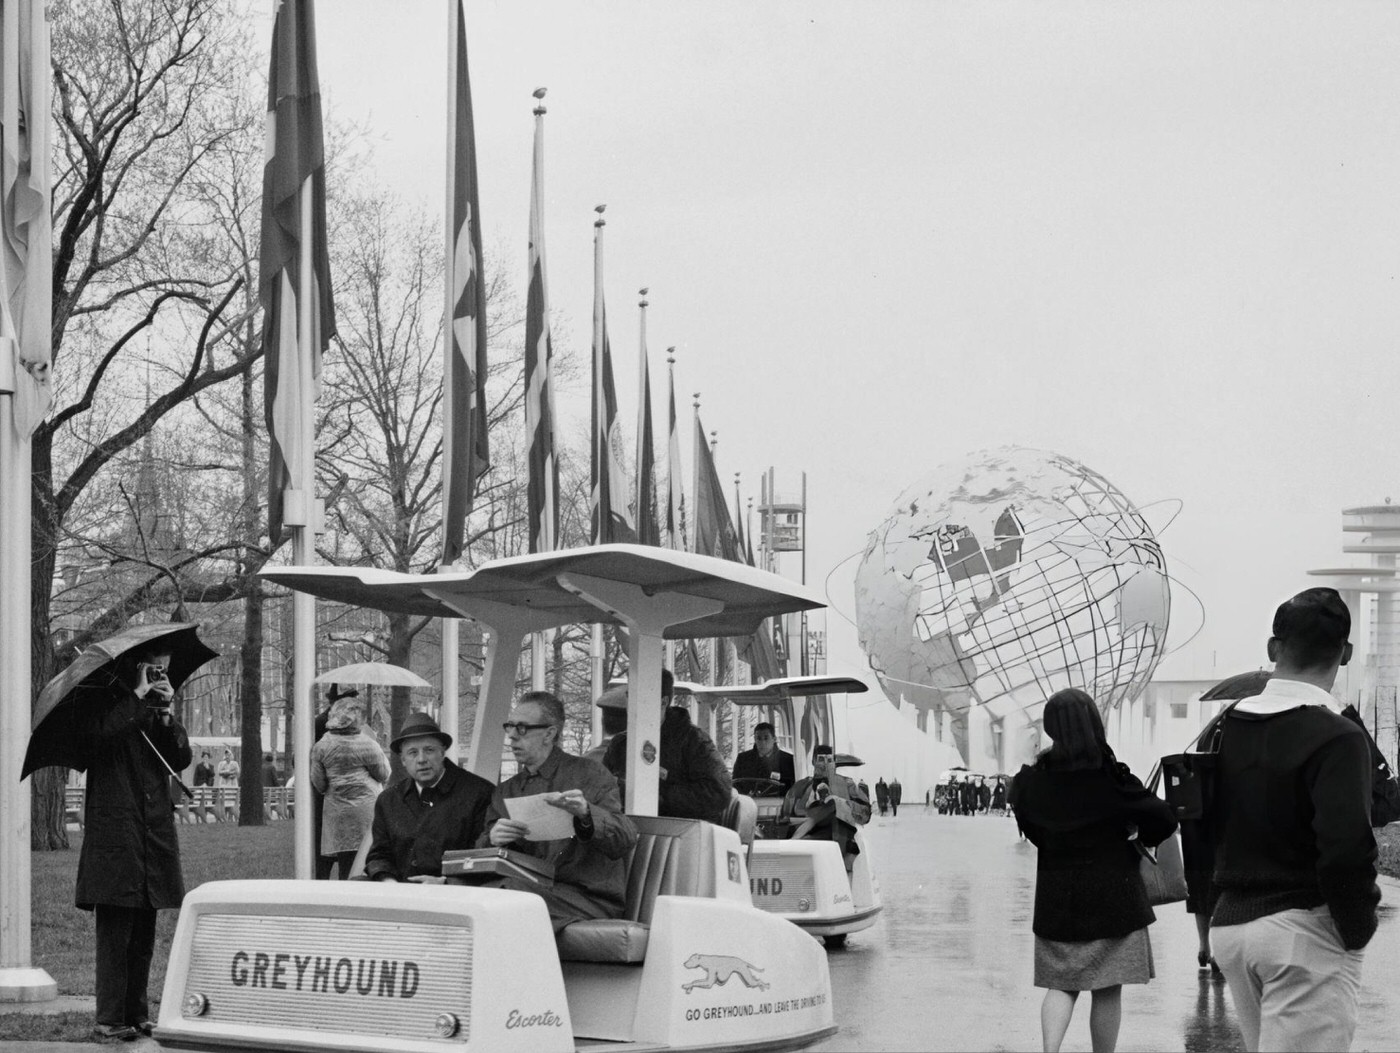 Visitors Riding In A Greyhound World'S Fair Escorter At The New York World'S Fair At Flushing Meadows-Corona Park In Queens, 1960S.